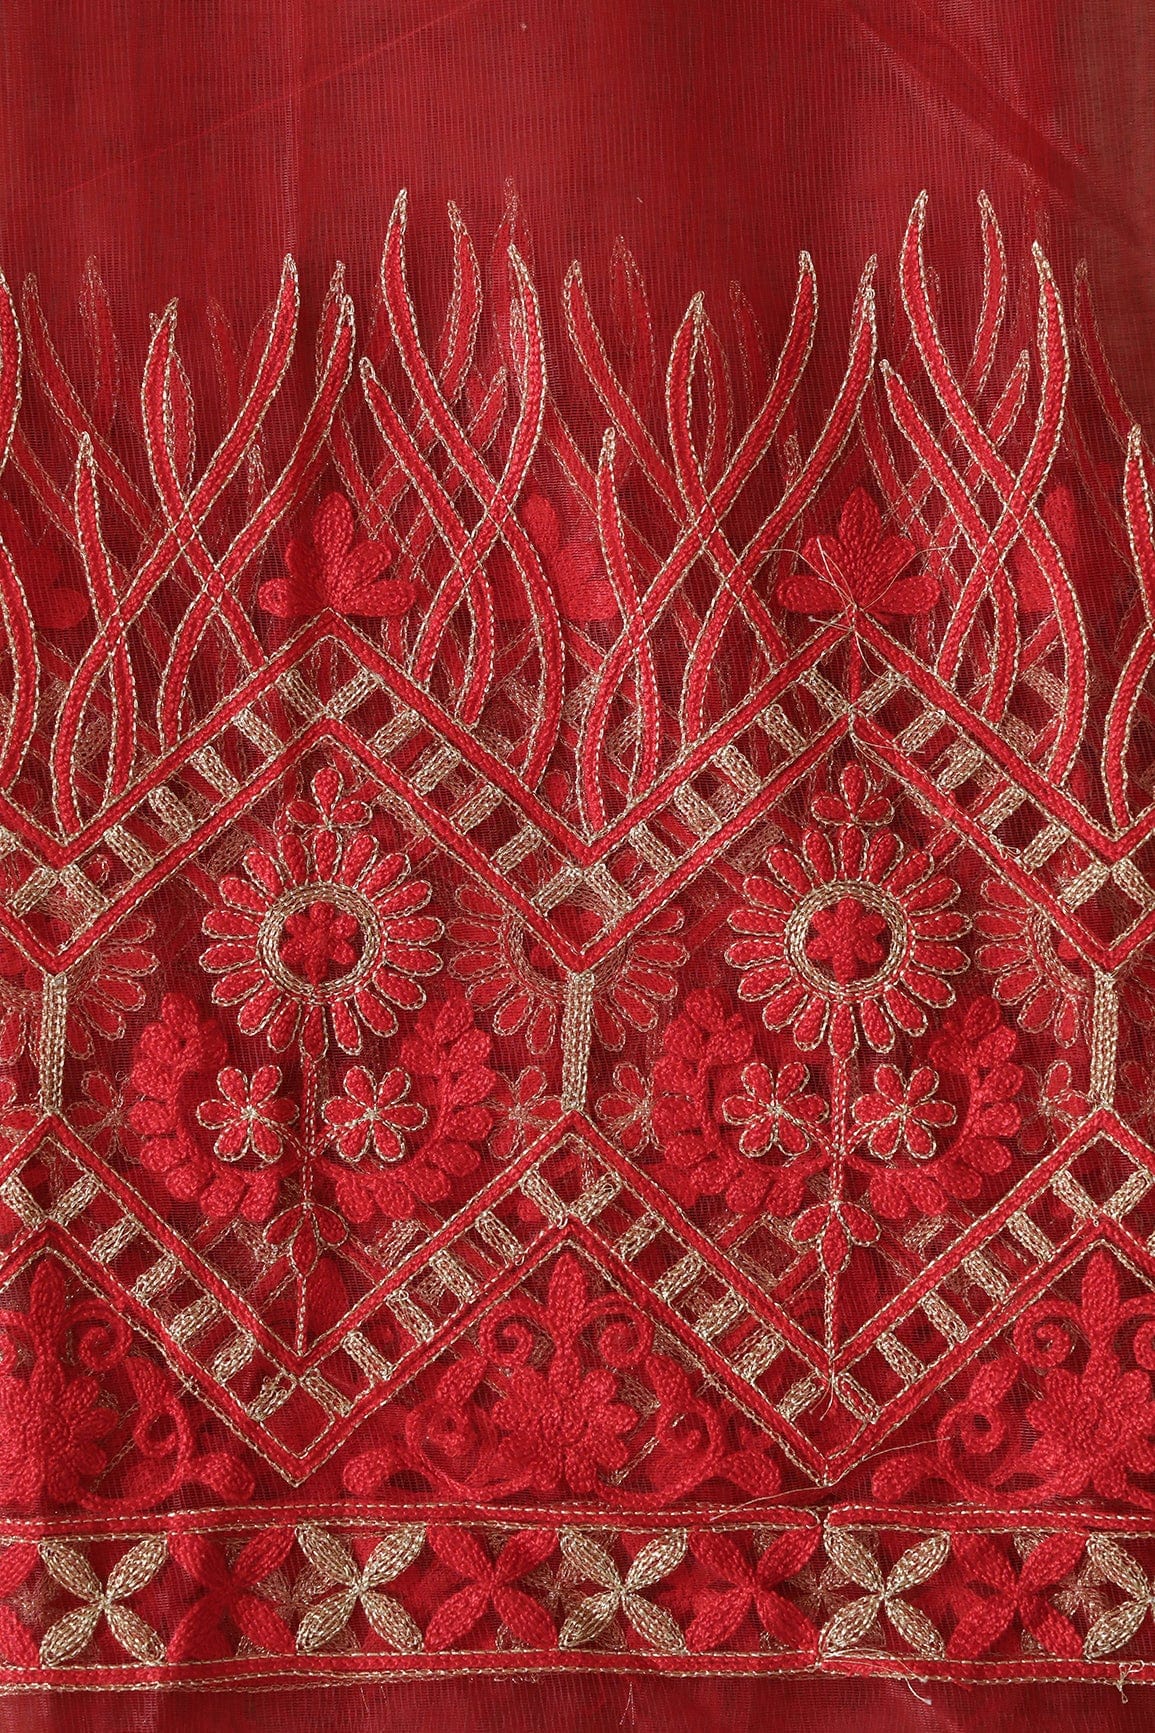 doeraa Embroidery Fabrics 1 Meter Cut Piece Of Gold Zari With Red Thread Border Embroidery Work On Red Soft Net Fabric